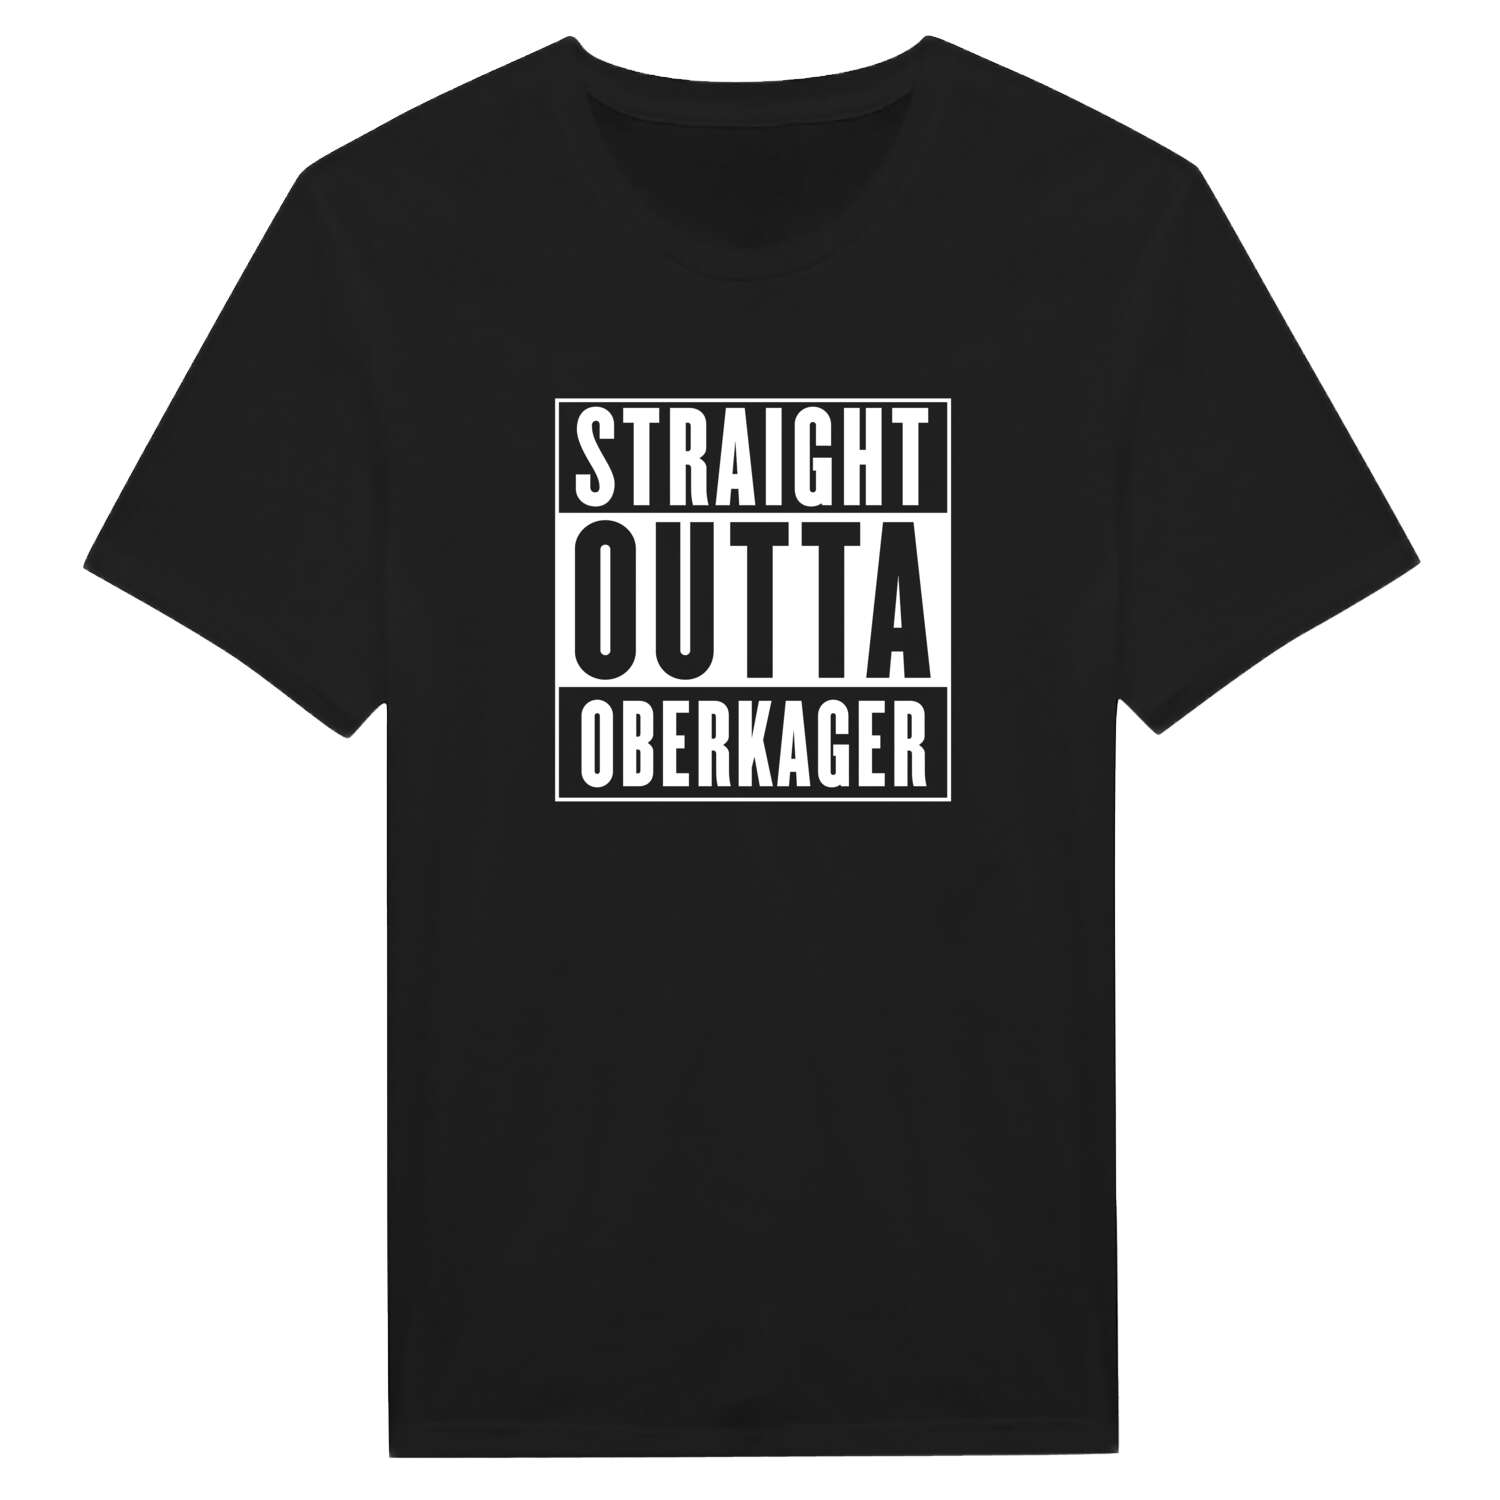 Oberkager T-Shirt »Straight Outta«